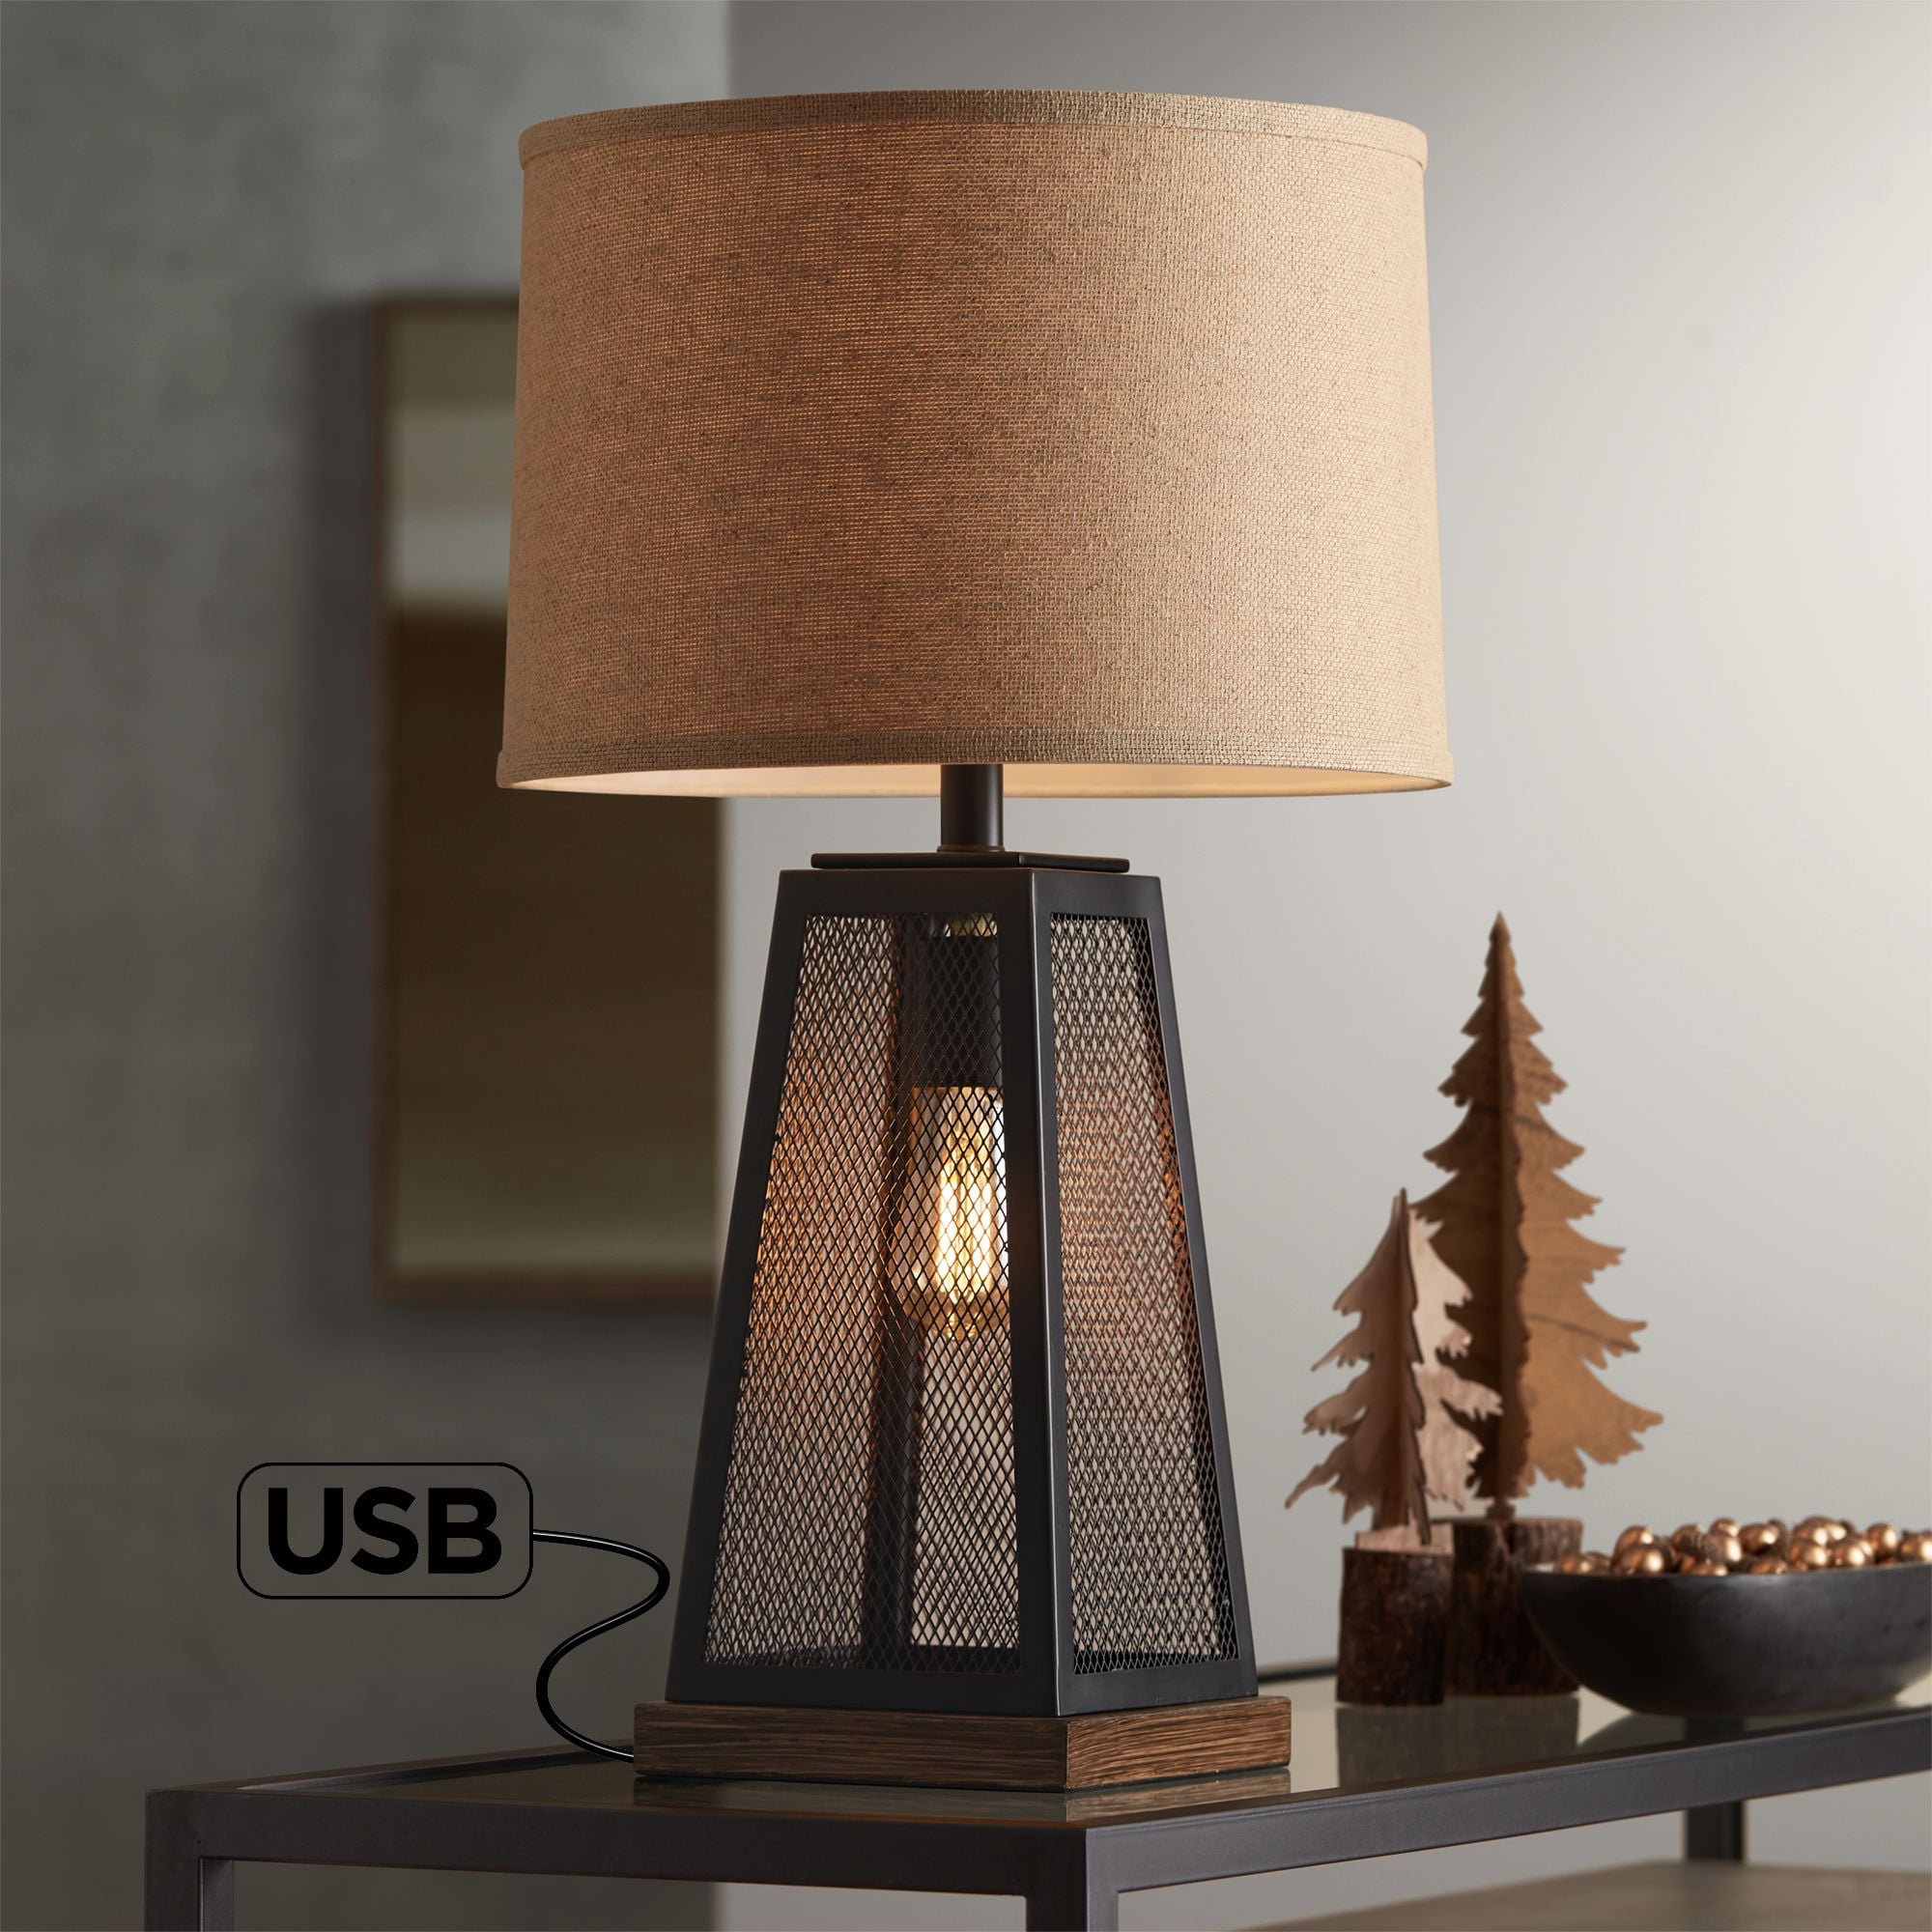 Industrial Artisan Table Lamp, Franklin Iron Works Industrial Table Lamp With Usb Port Ikea